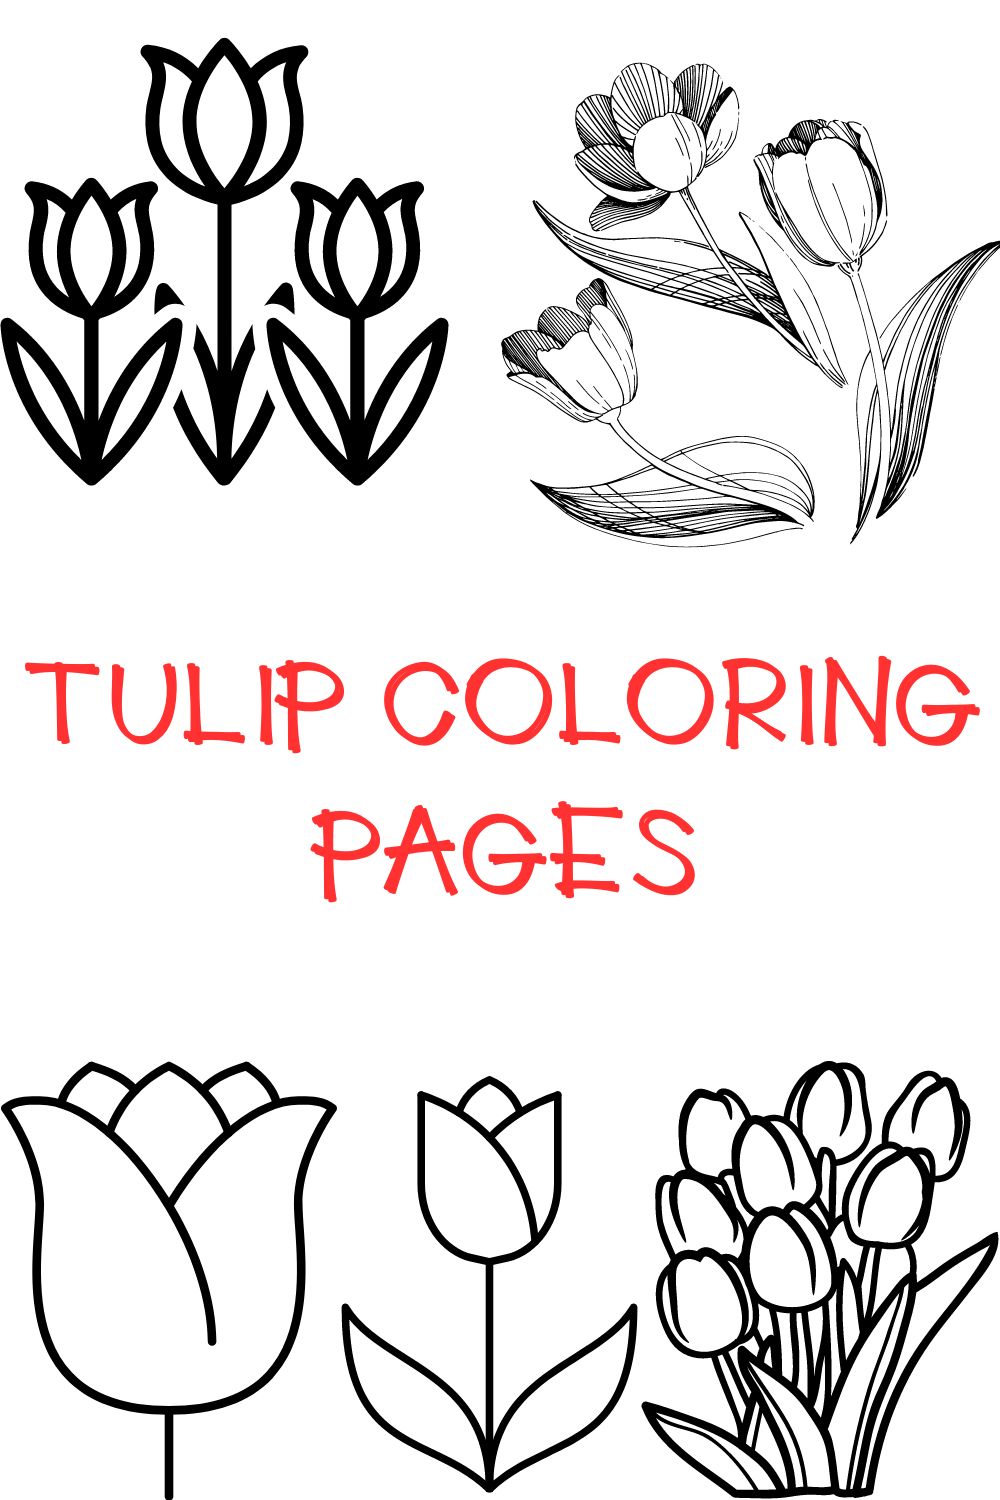 Tulip coloring pages.